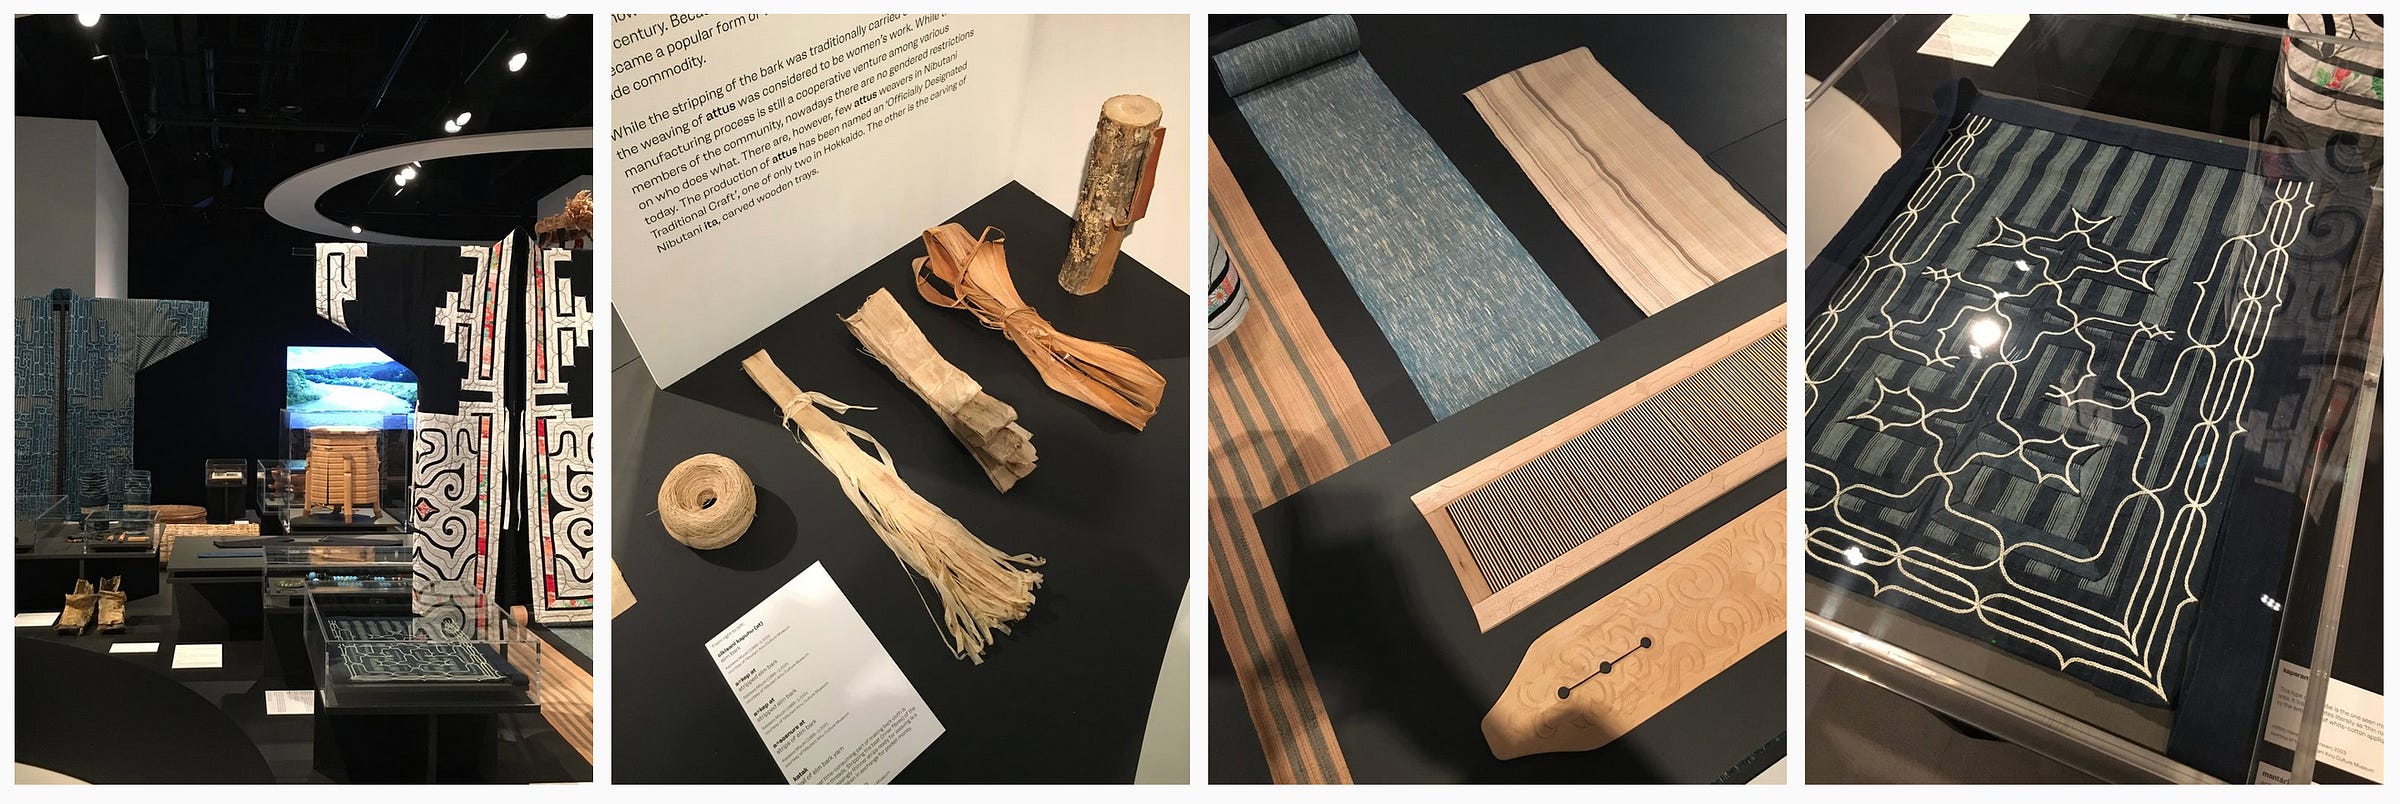 1. Room of the exhibit showing a variety of robes (cikarkarpe, kaparamip and attus amip) and artefacts; 2. The process to make elm barkcloth fibre from bark to yarn; 3. Example of barkcloths (back) and heddle and paddle weaving tools (front); 4. A mantari (apron) made from cotton with embroidery. 